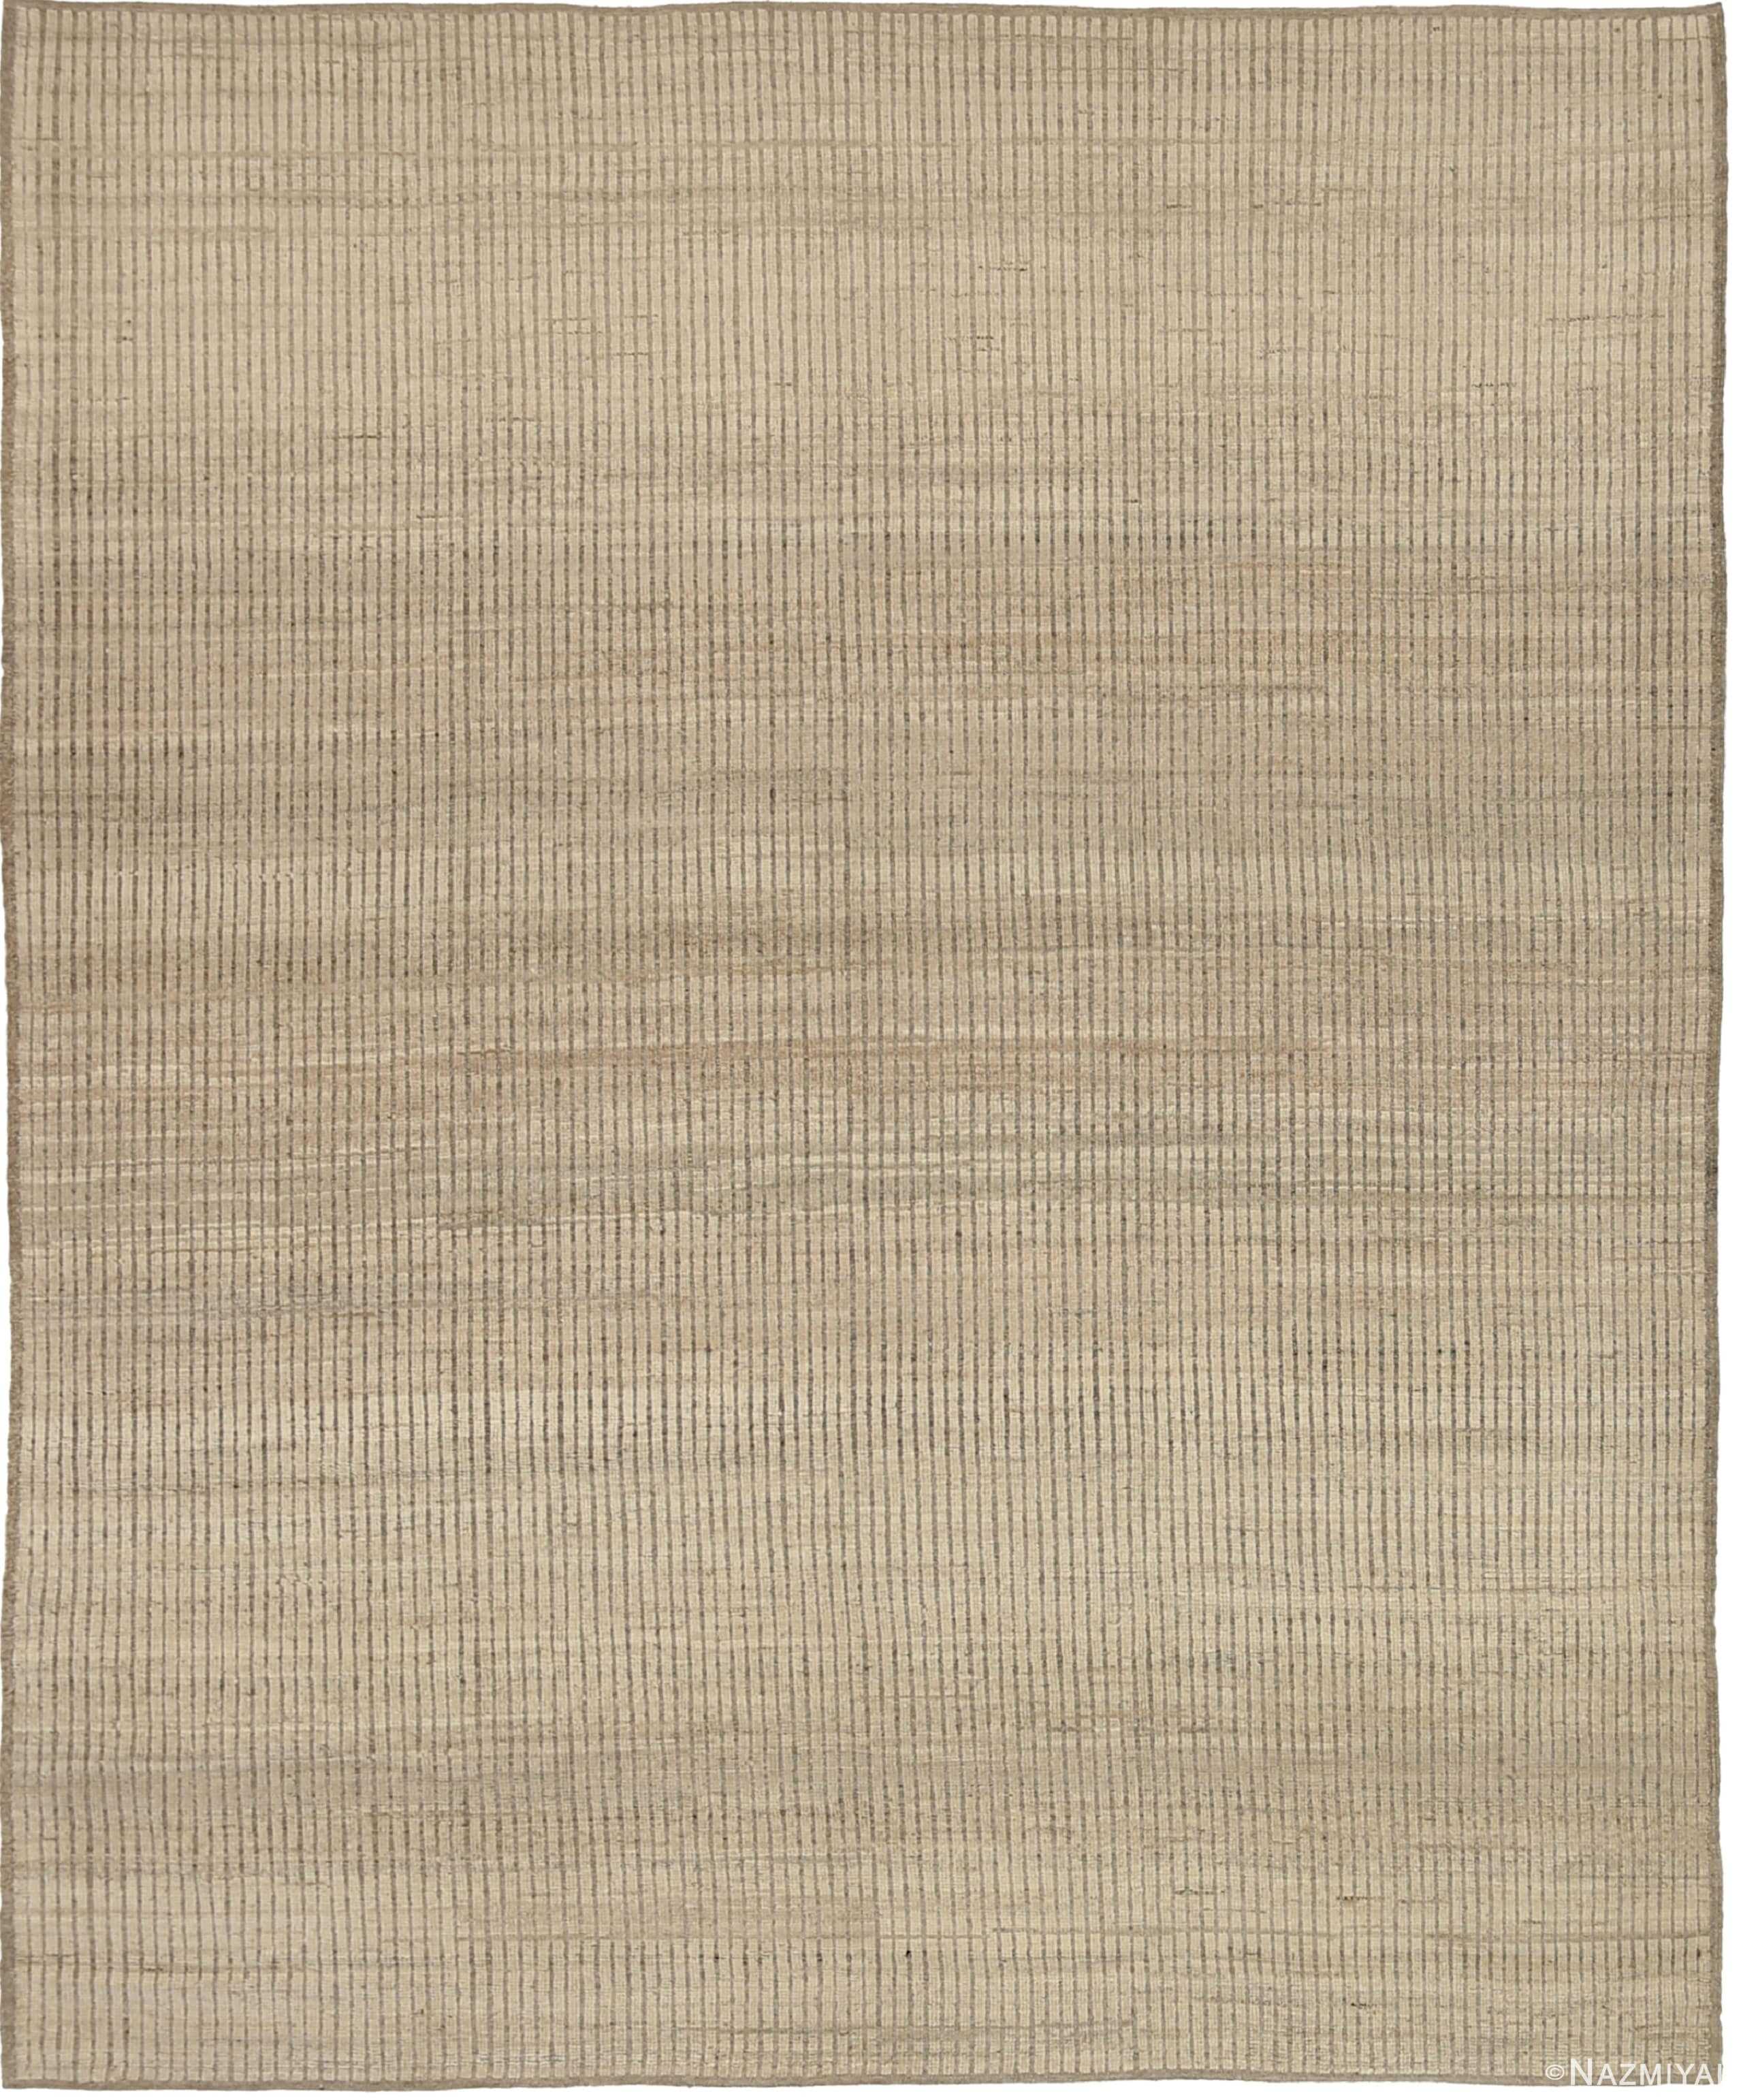 Soft Neutral Textured Modern Distressed Rug #60827 by Nazmiyal Antique Rugs